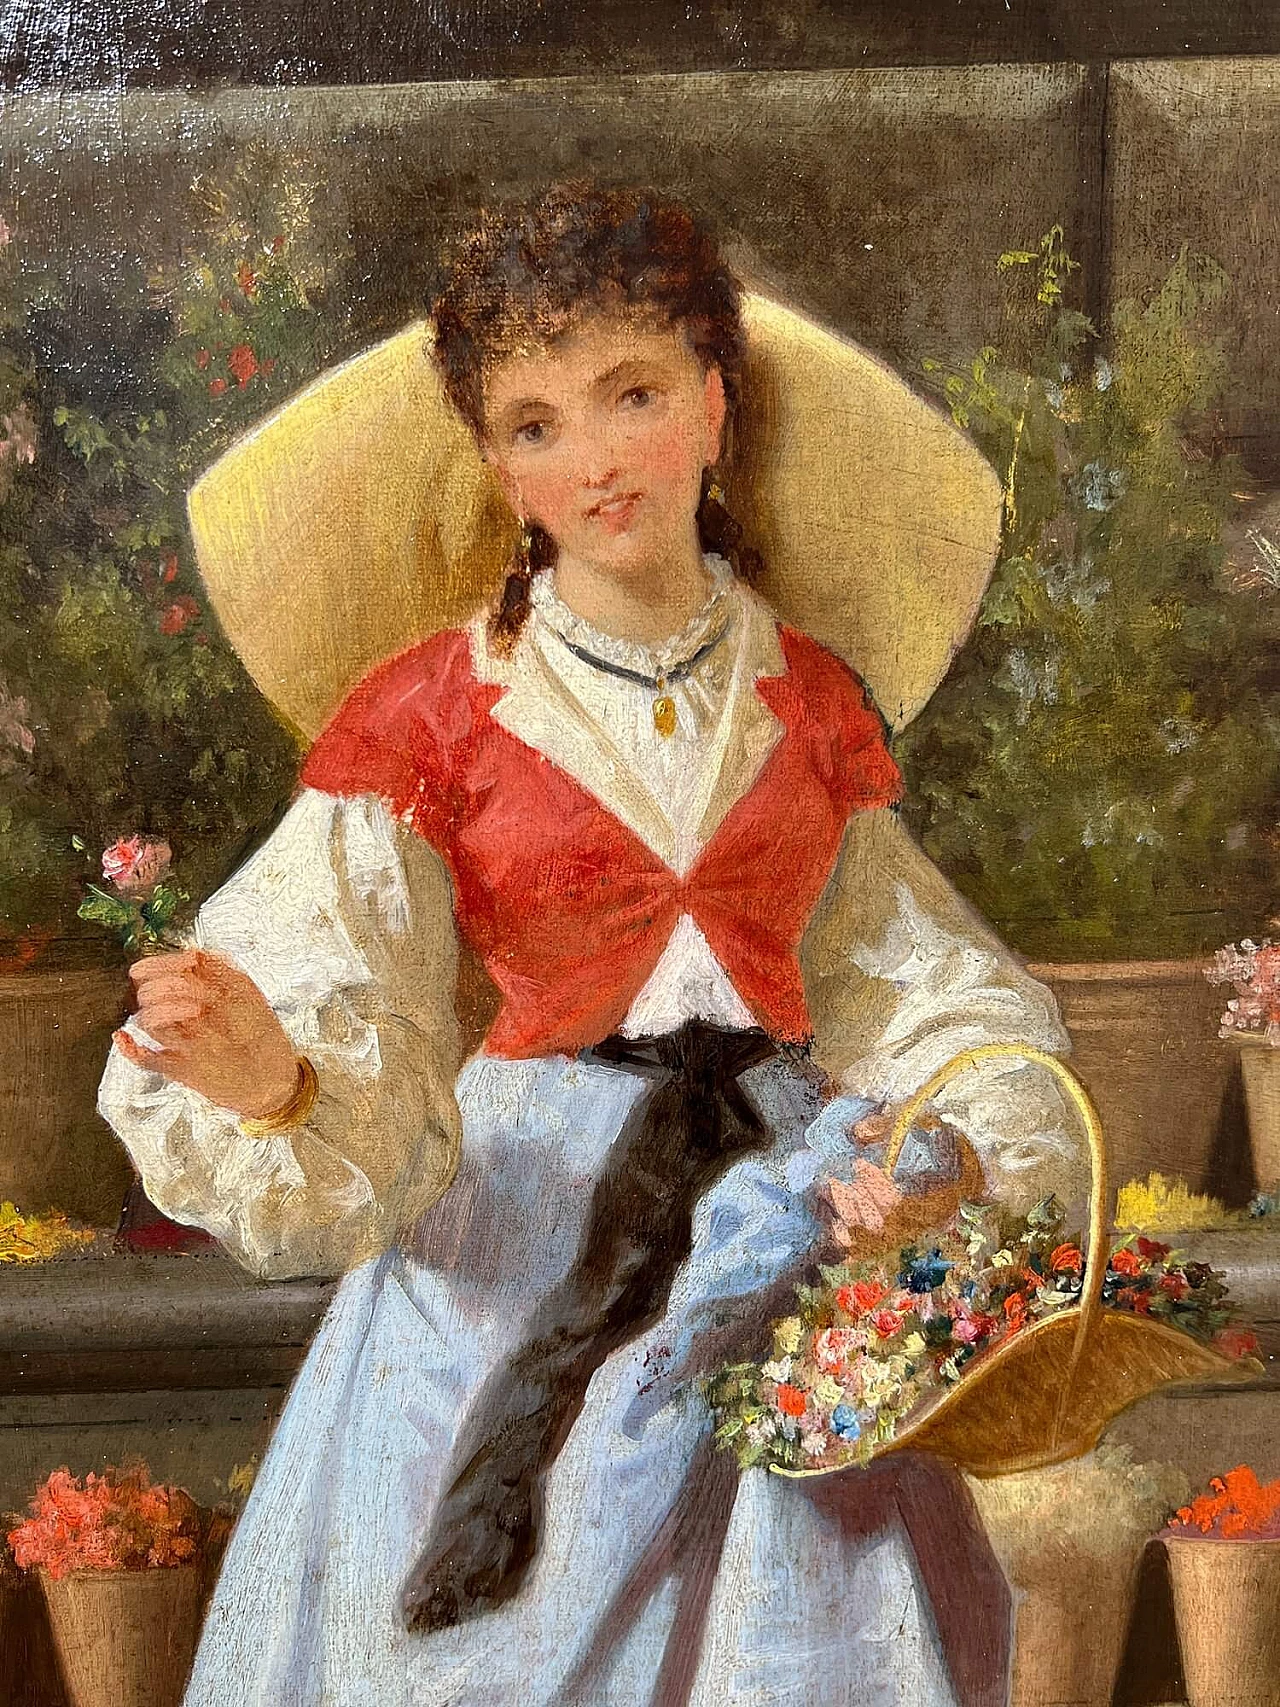 Enrico Fanfani, flower girl at Palazzo Strozzi, oil painting on canvas, 19th century 11